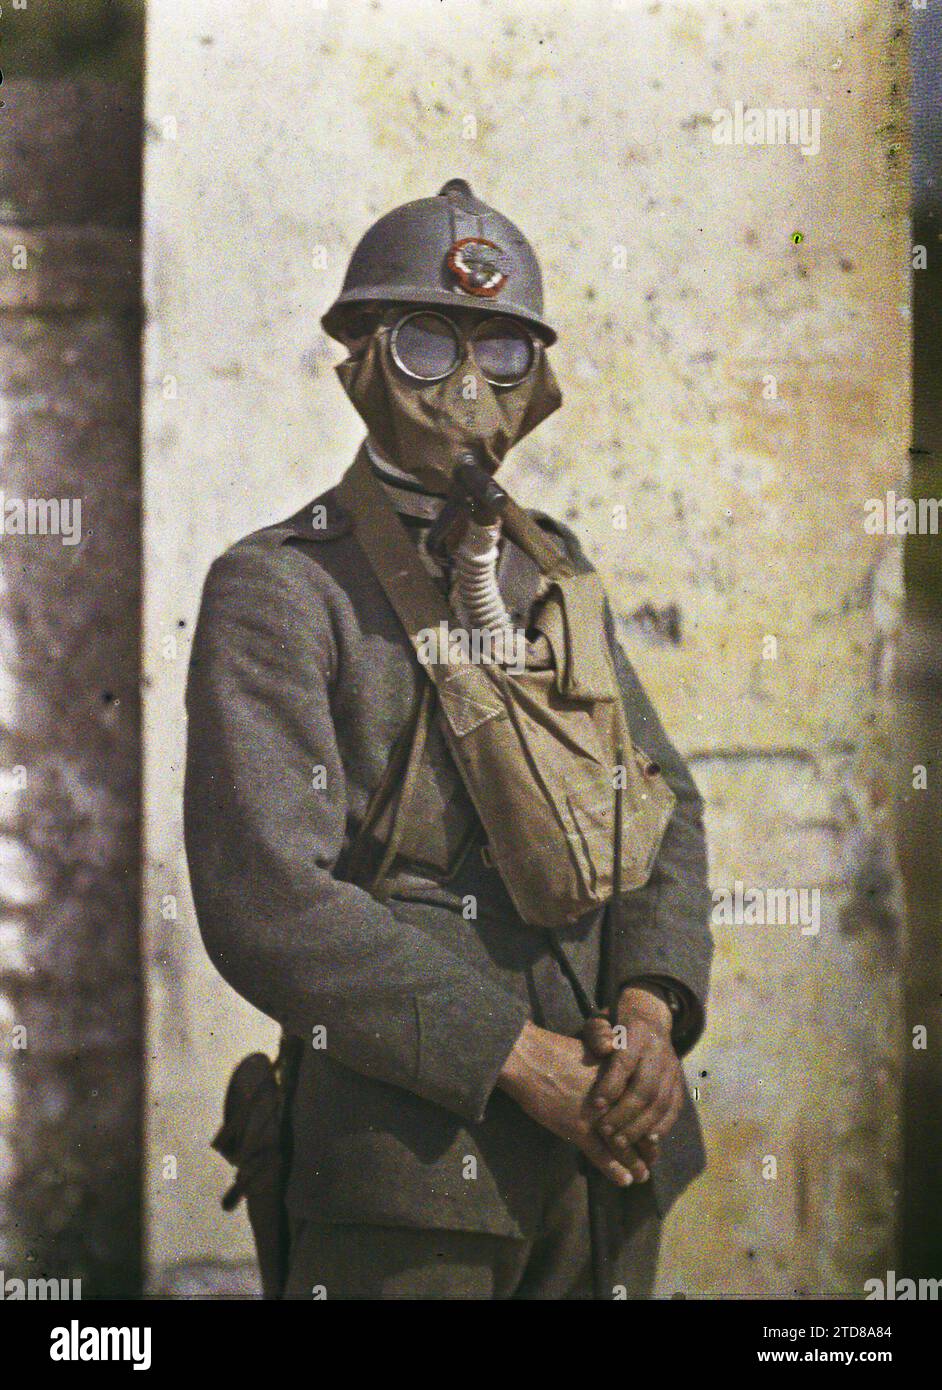 Between Castelfranco and Asolo, Italy Italian Carabinier with his mask, Clothing, HD, Human Beings, First World War, Society, Military Uniform, Mask, exists in high definition, Portrait, Back, Man, Army, Italy, Italian Carabinier with his mask, Castelfranco, Asolo, 10/06/1918 - 10/06/1918, Cuville, Fernand, 1918 - Italy - Fernand Cuville - (March-August), Autochrome, photo, Glass, Autochrome, photo, Positive, Vertical, Size 9 x 12 cm Stock Photo